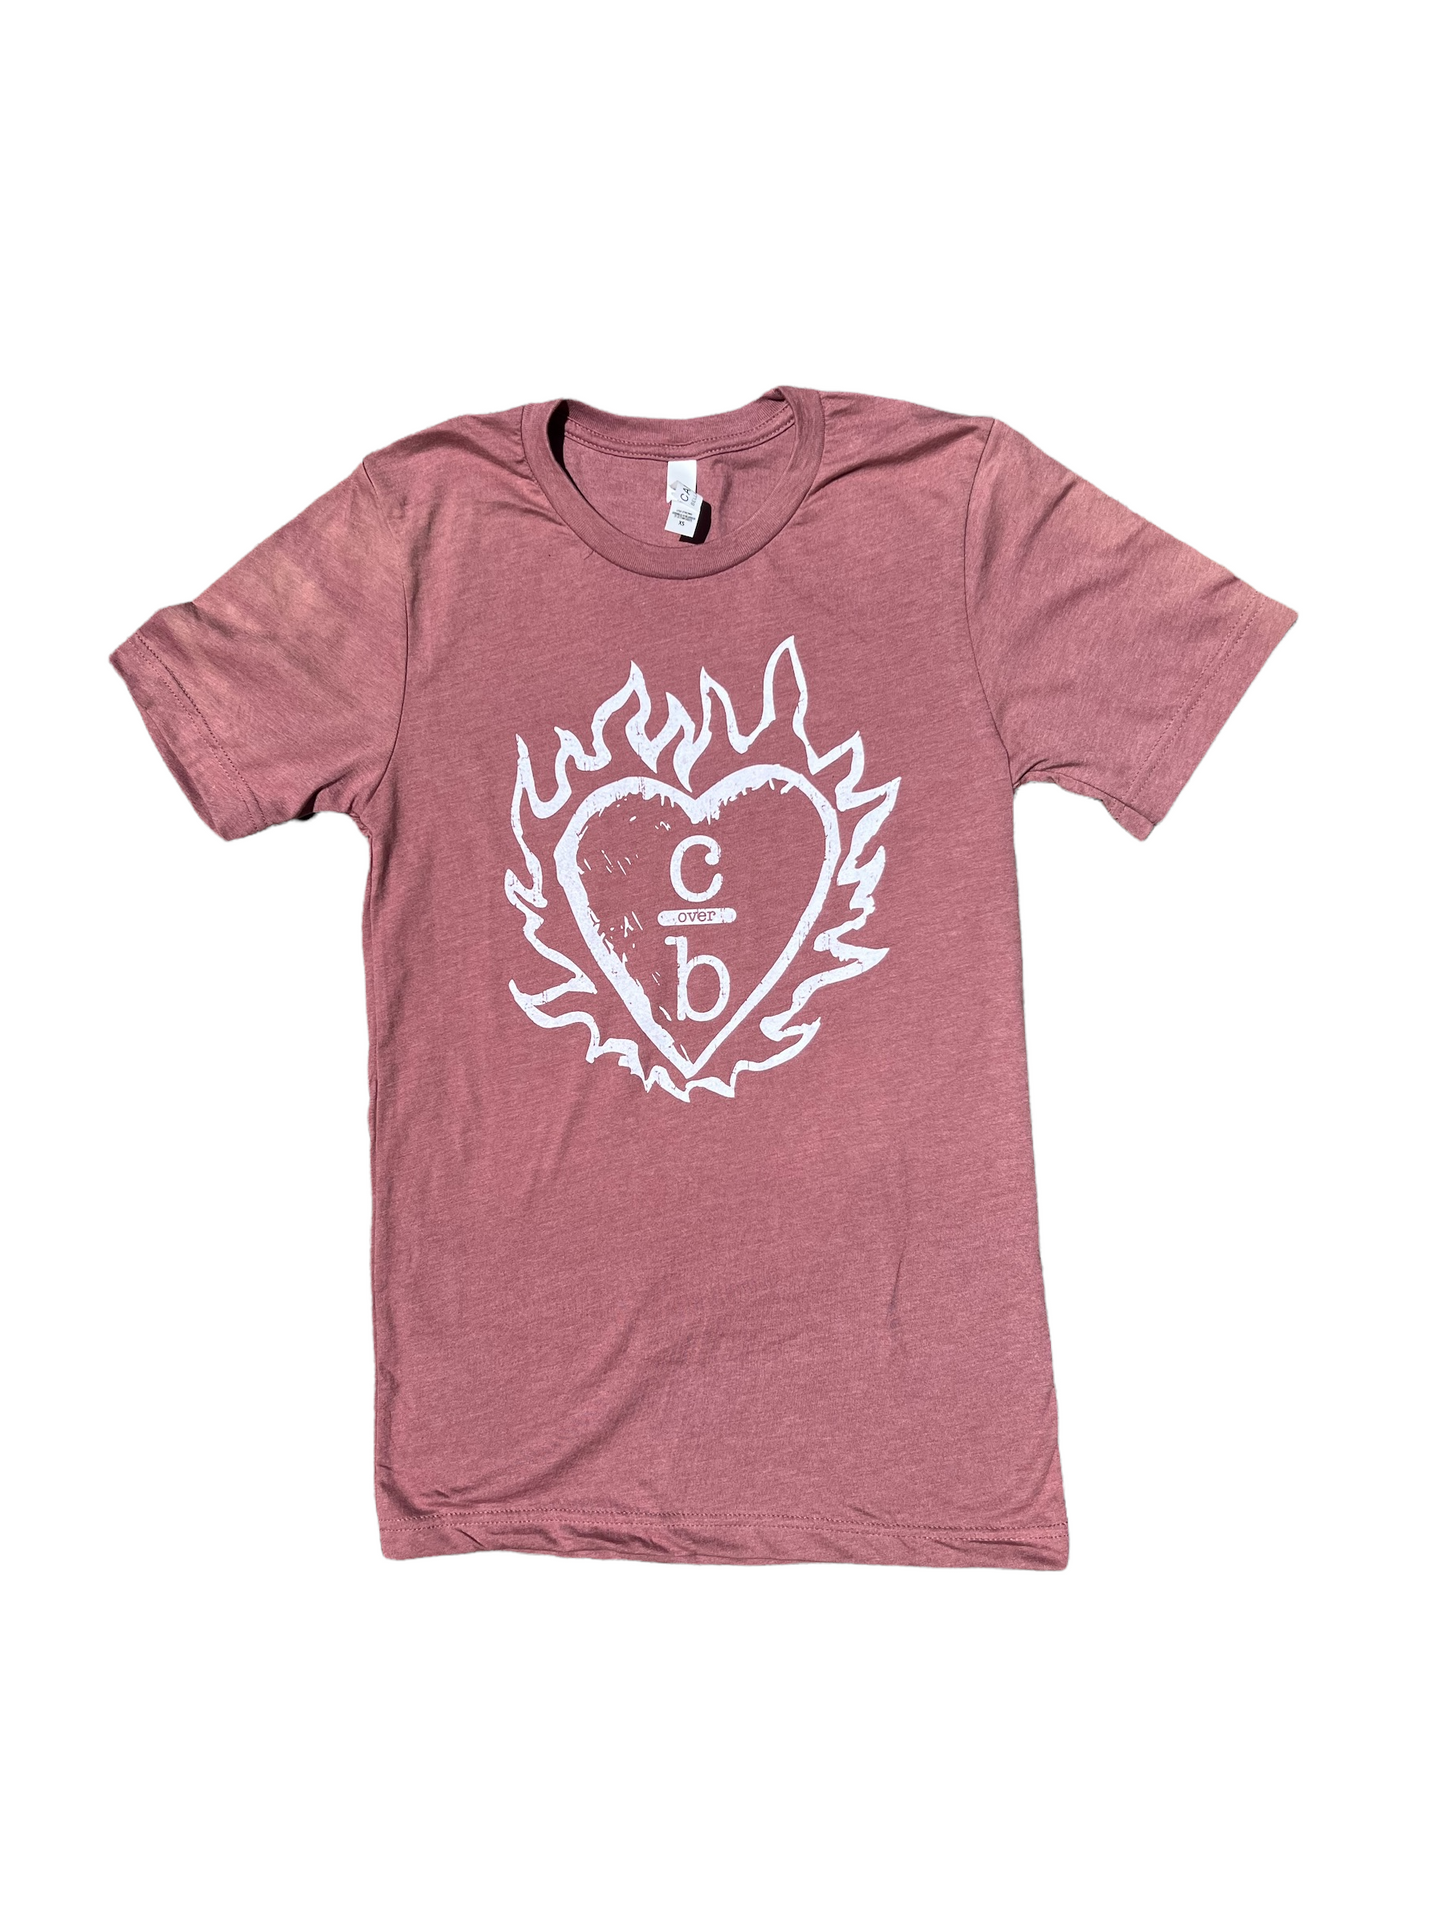 ONE TREE HILL Flame Heart Clothes Over Bros- T Shirt – Heather Mauve